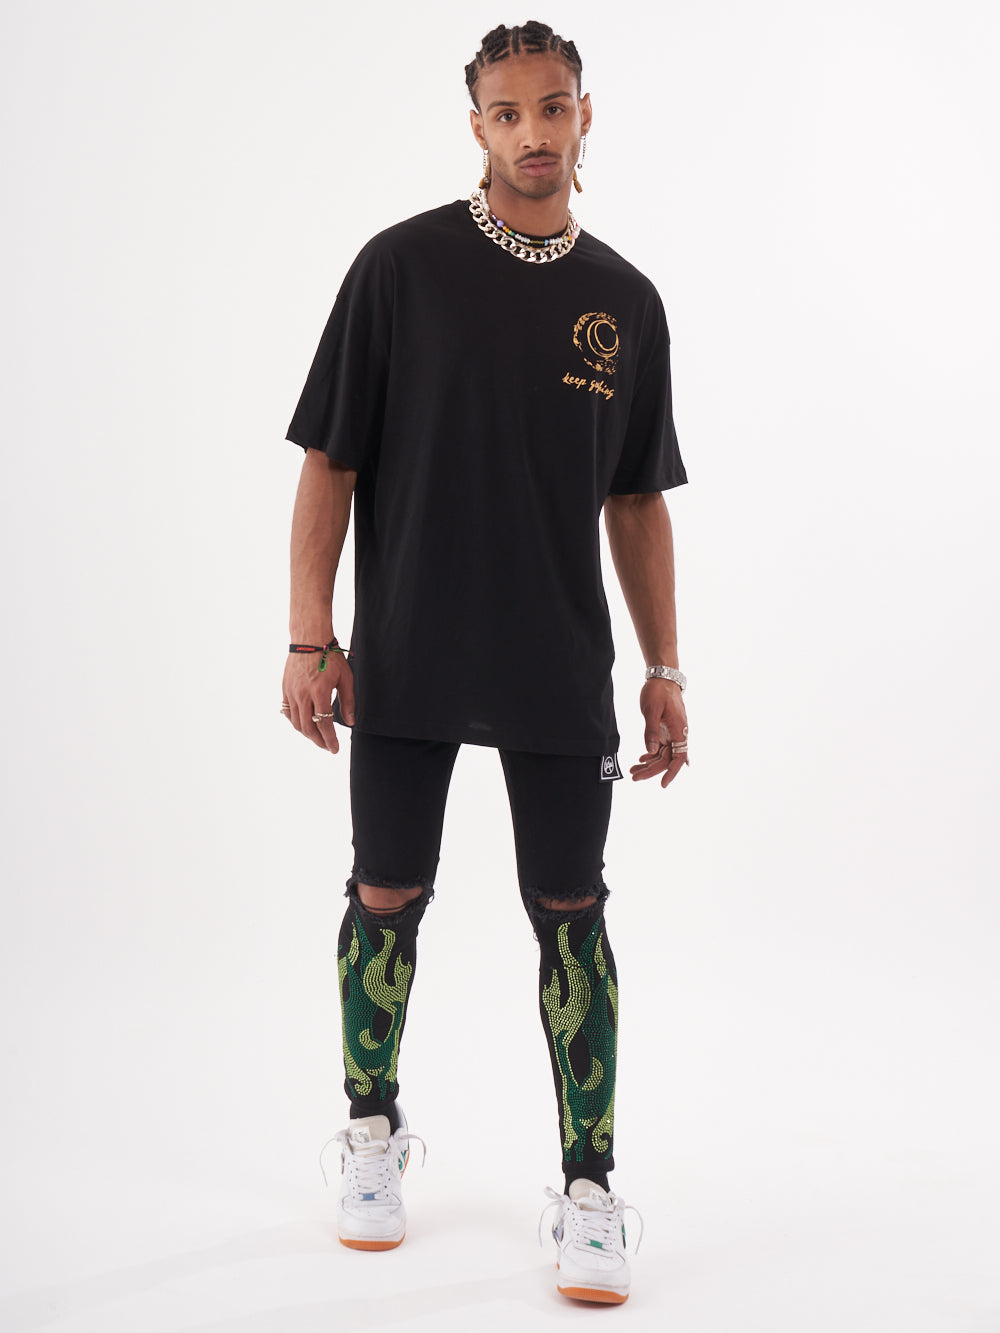 A man wearing a VINCENT T-SHIRT and green leggings.